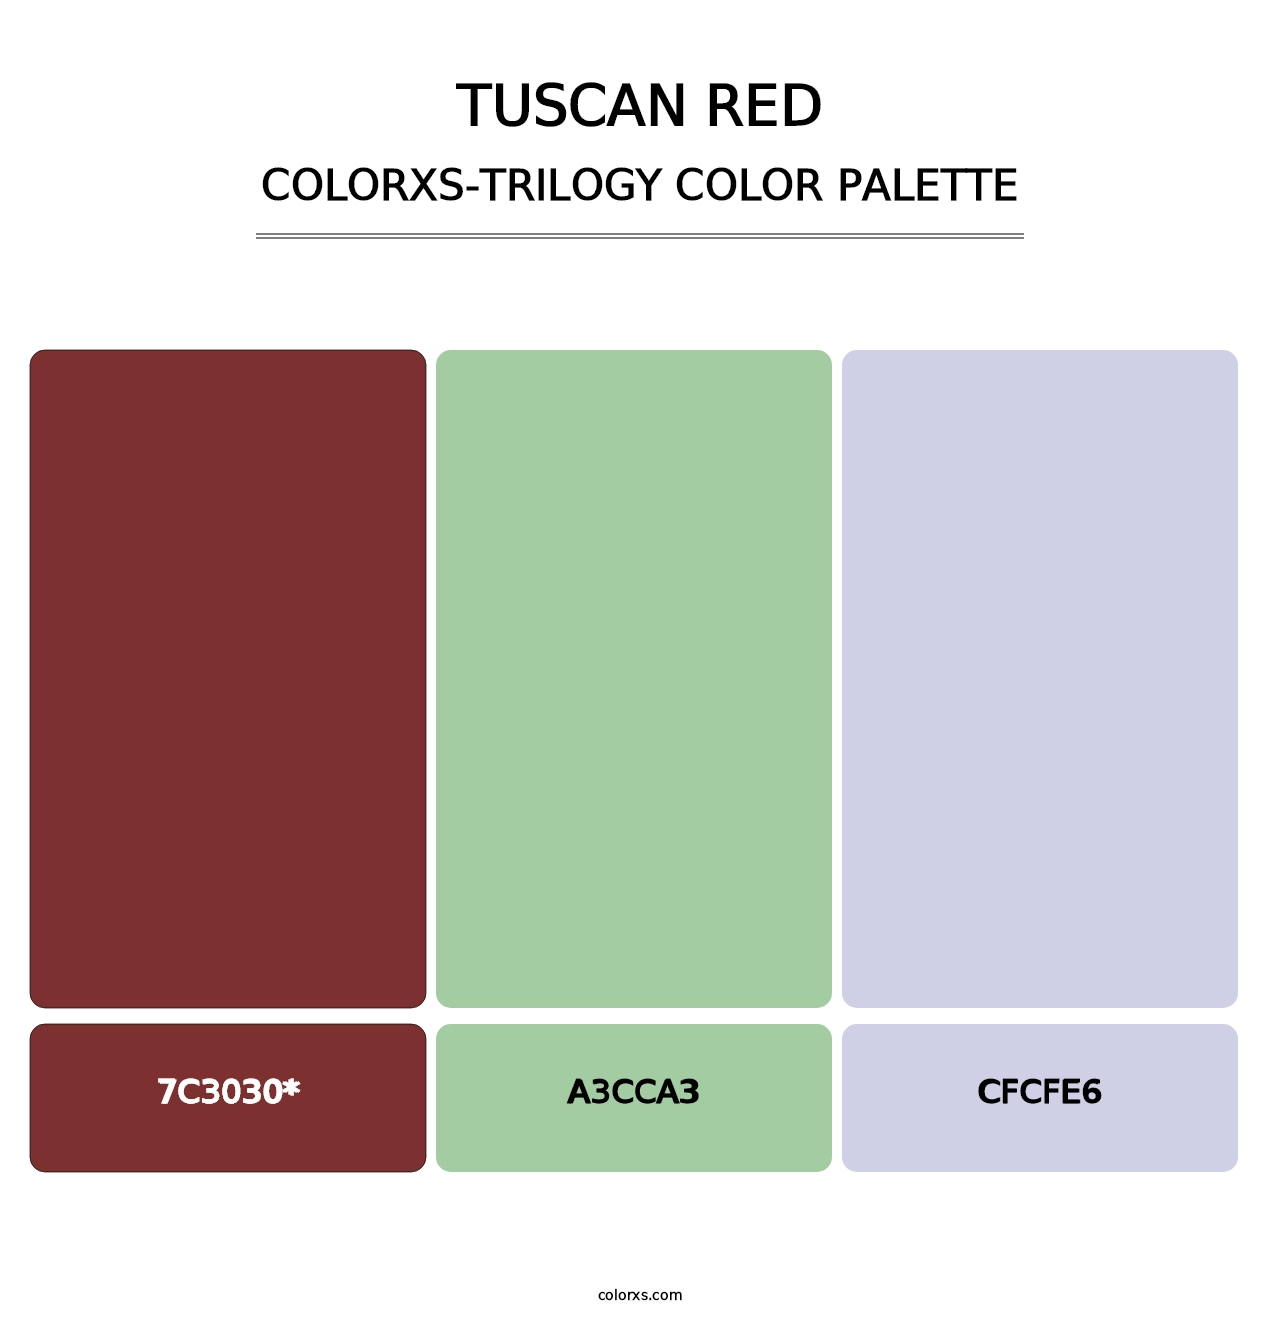 Tuscan Red - Colorxs Trilogy Palette